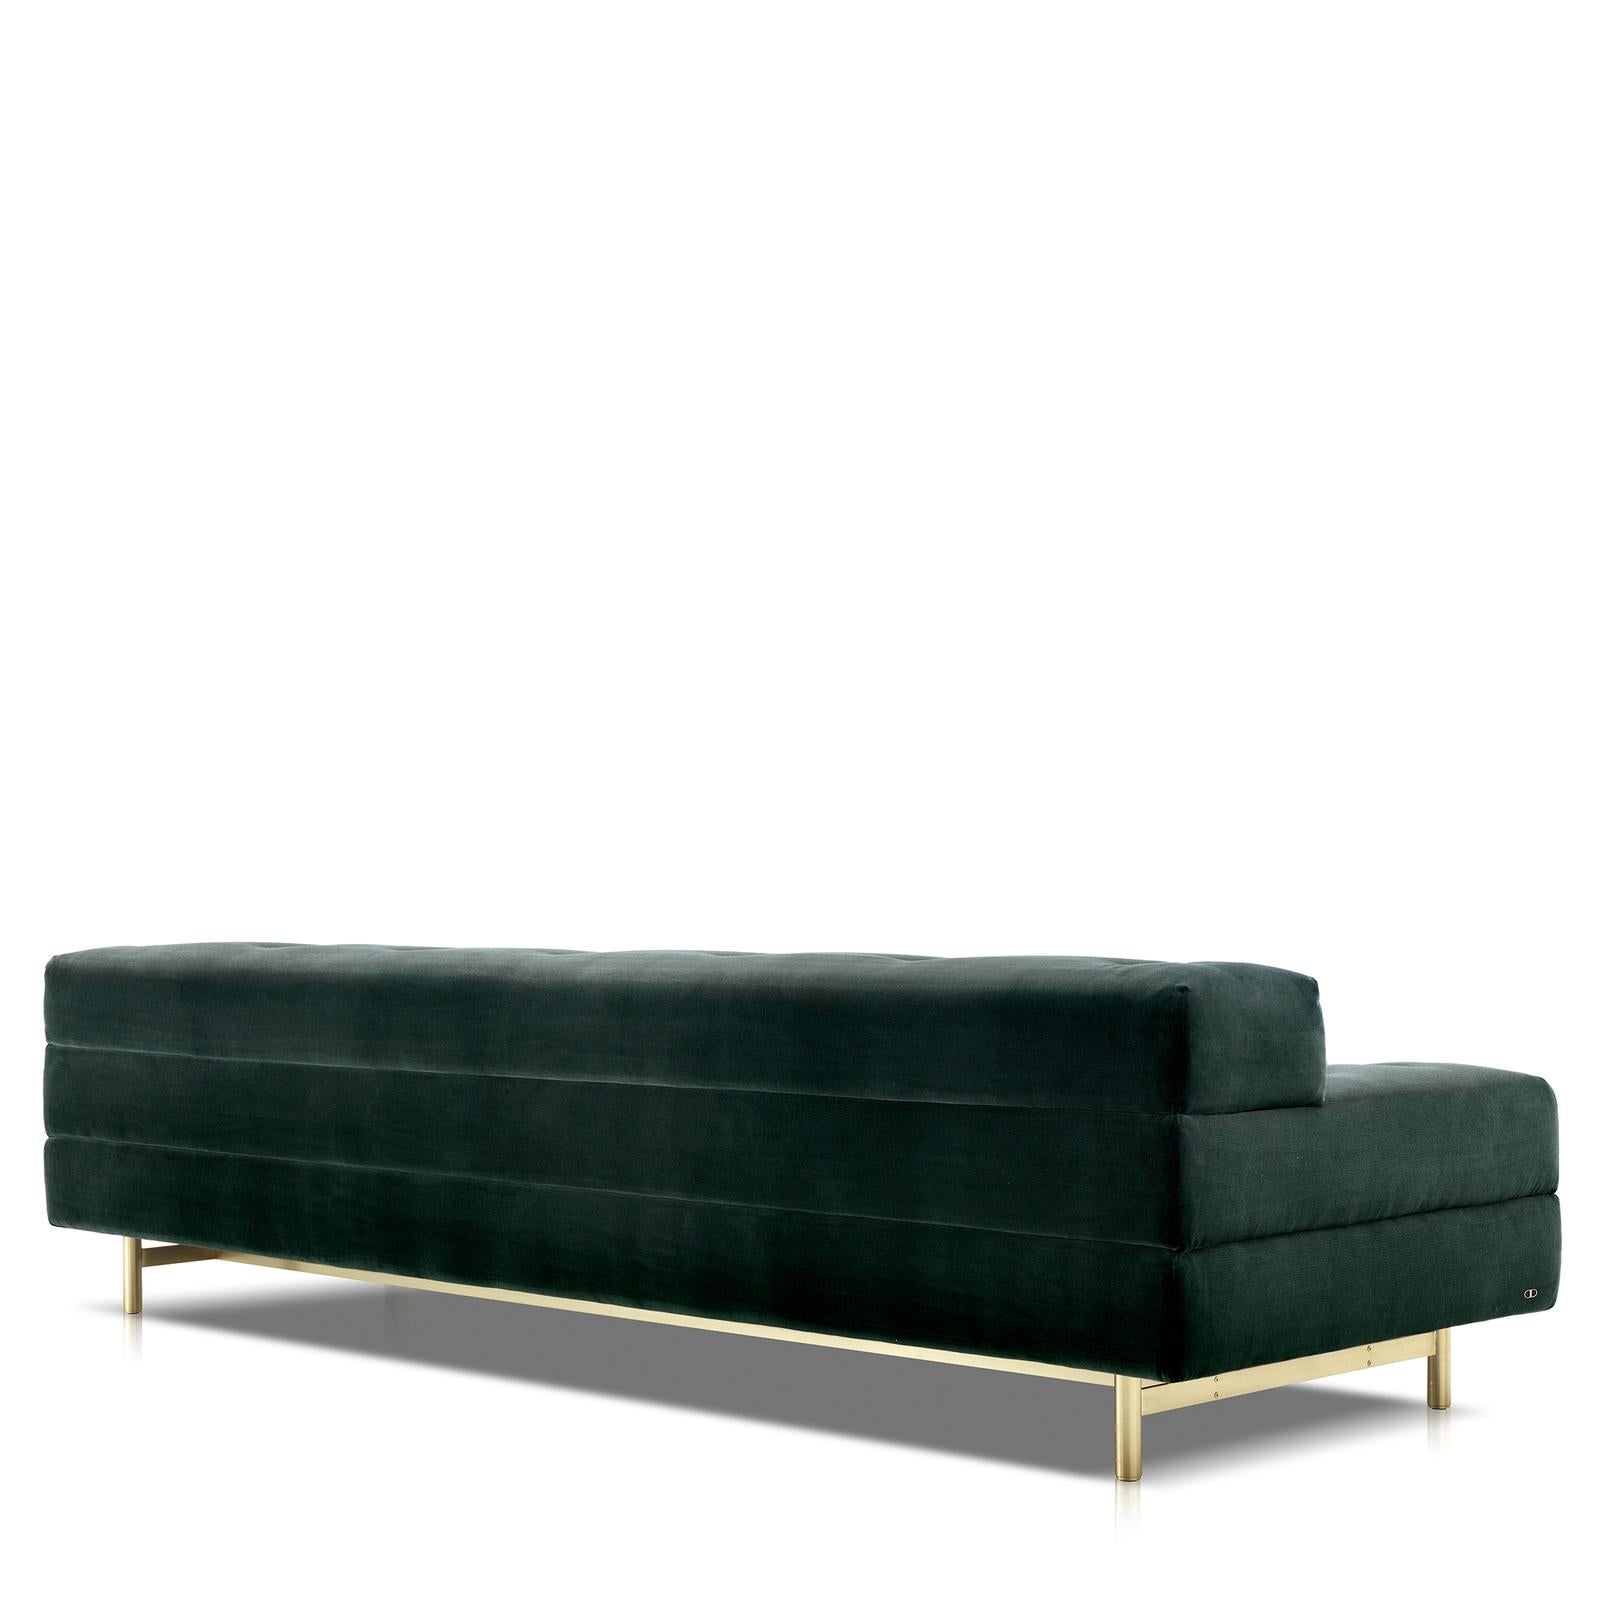 Sleek and sophisticated, this sofa is a versatile piece that will superbly fit both classic and modern decors. Upholstered with refined, green velvet fabric, its long silhouette rests on four slim feet made of satin brass, and on a steel structure